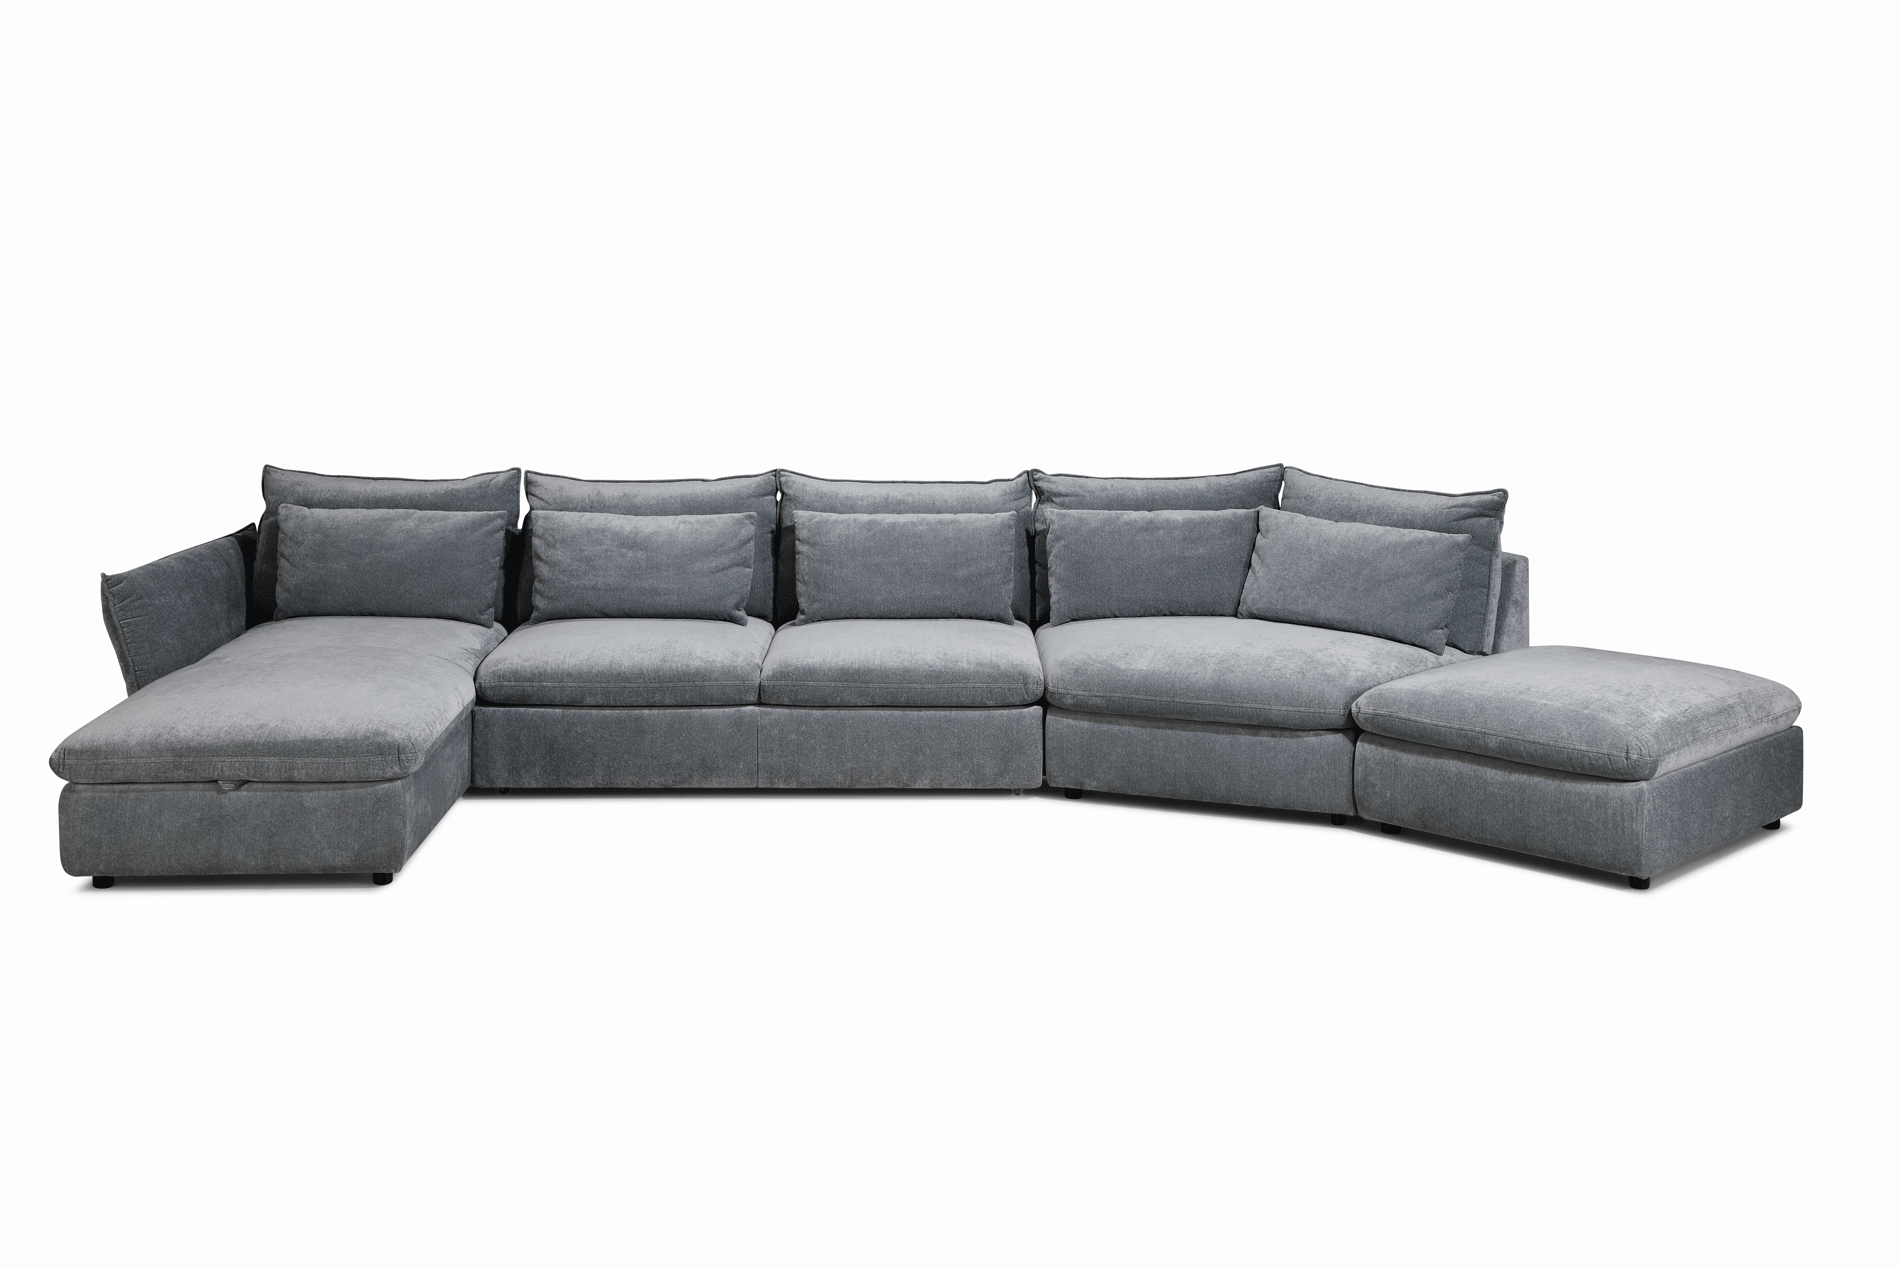 Living Room Furniture Sleepers Sofas Loveseats and Chairs Idylla Sectional w/ Bed & storage